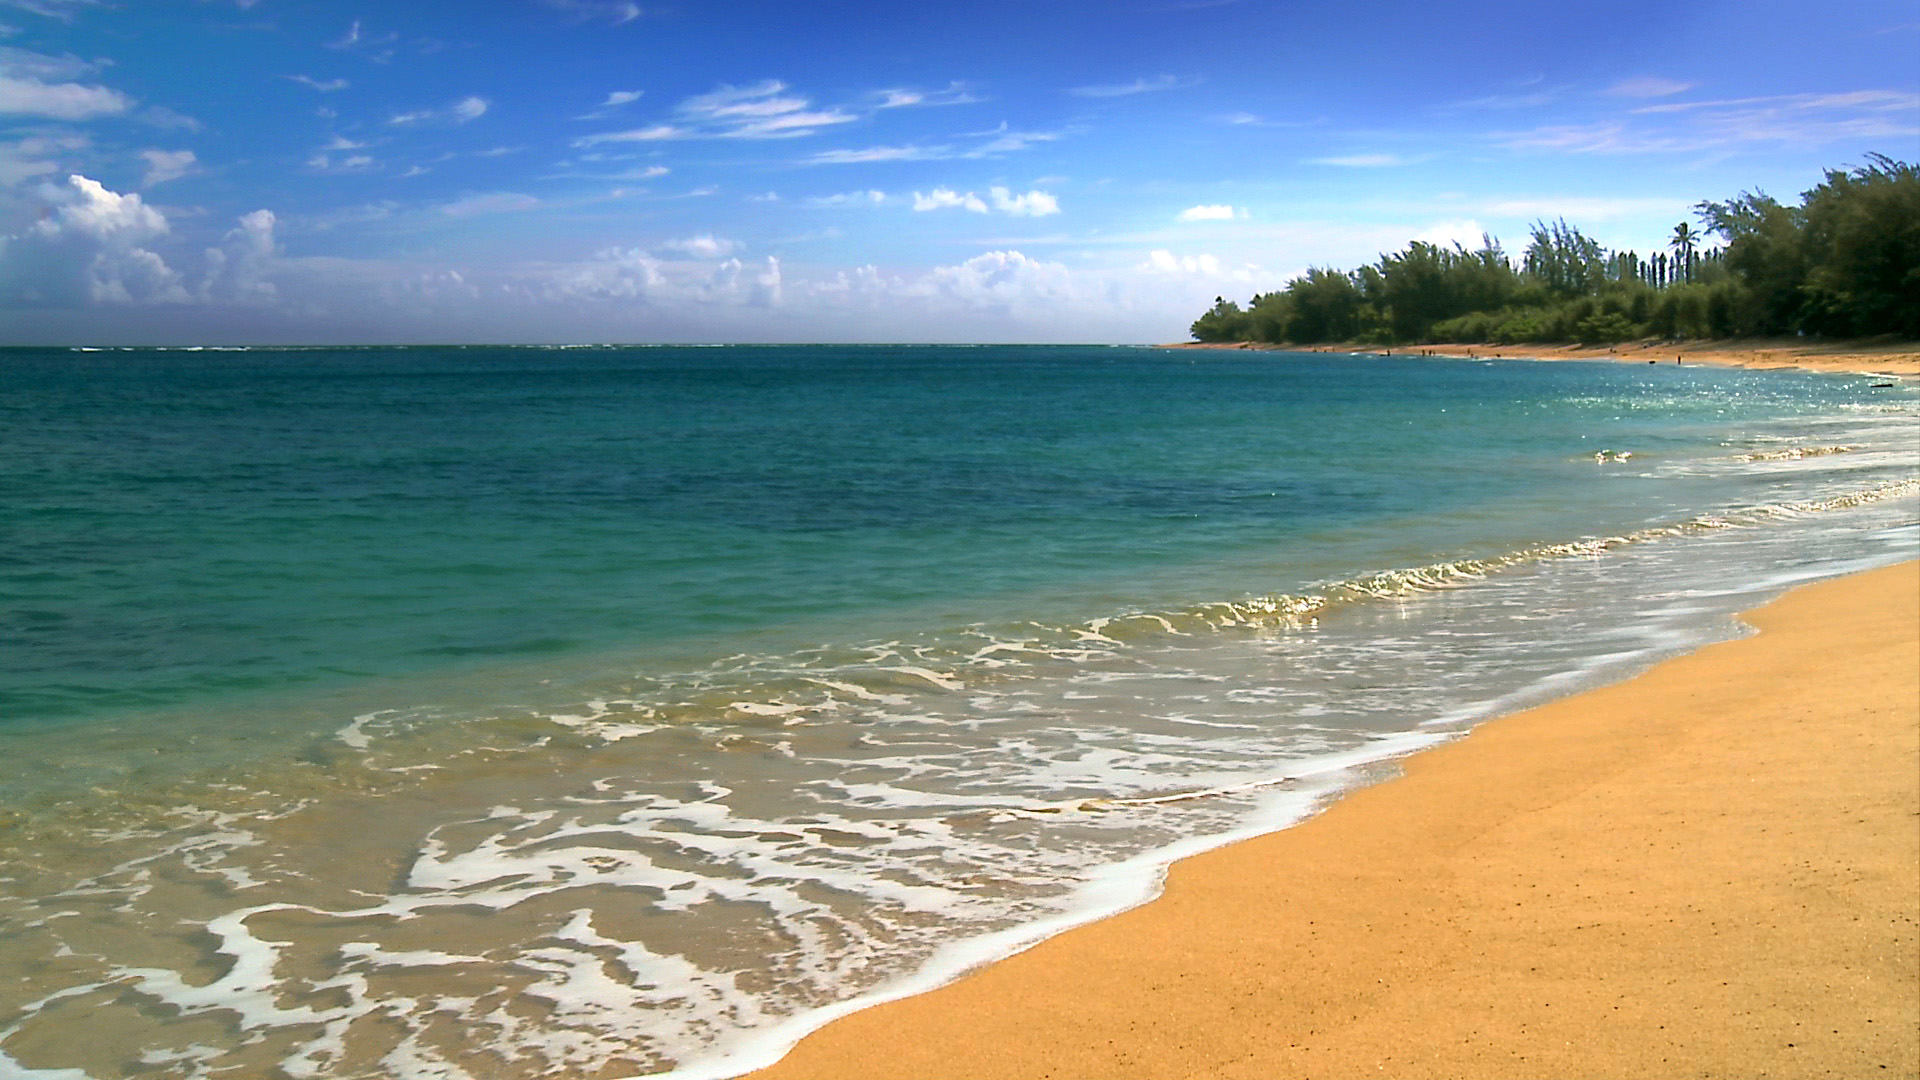 SEE The Most Beautiful Hawaii Beaches Photos from our new HD Video DVD